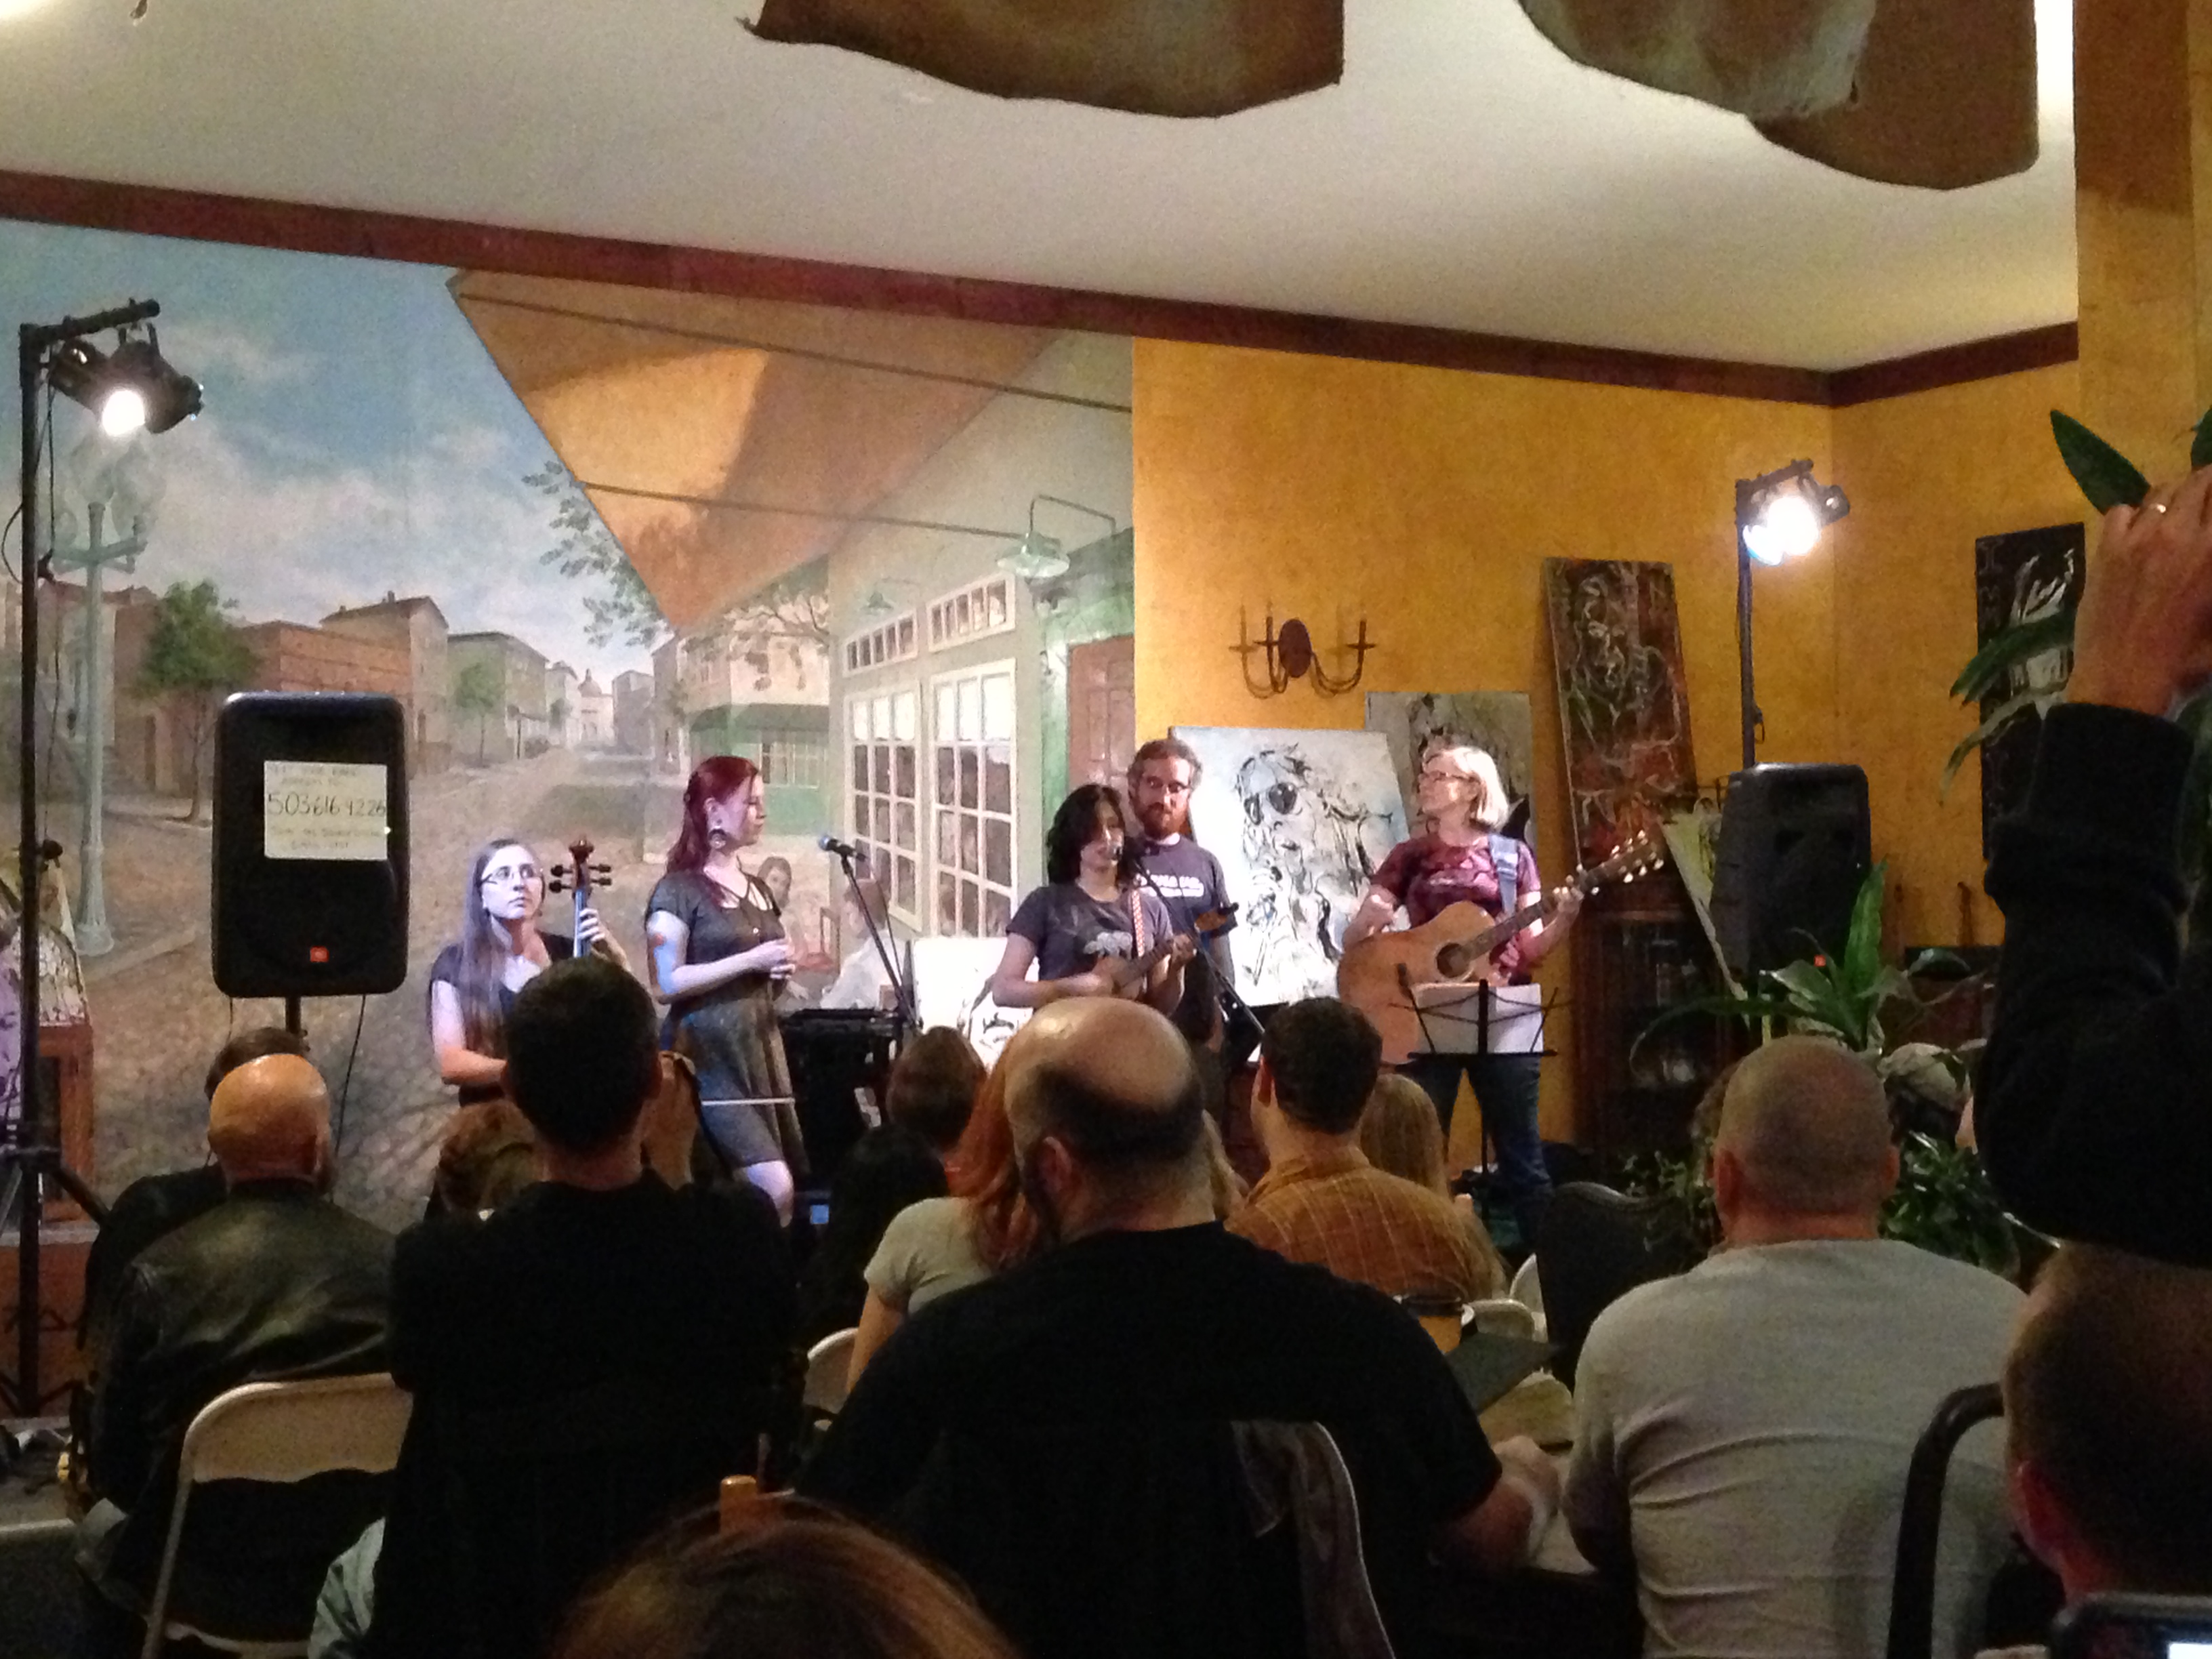 The Doubleclicks, Molly Lewis, Marian Call, and Scott Barkan performing at Rebecca’s Coffe House in San Diego, California, July 2013